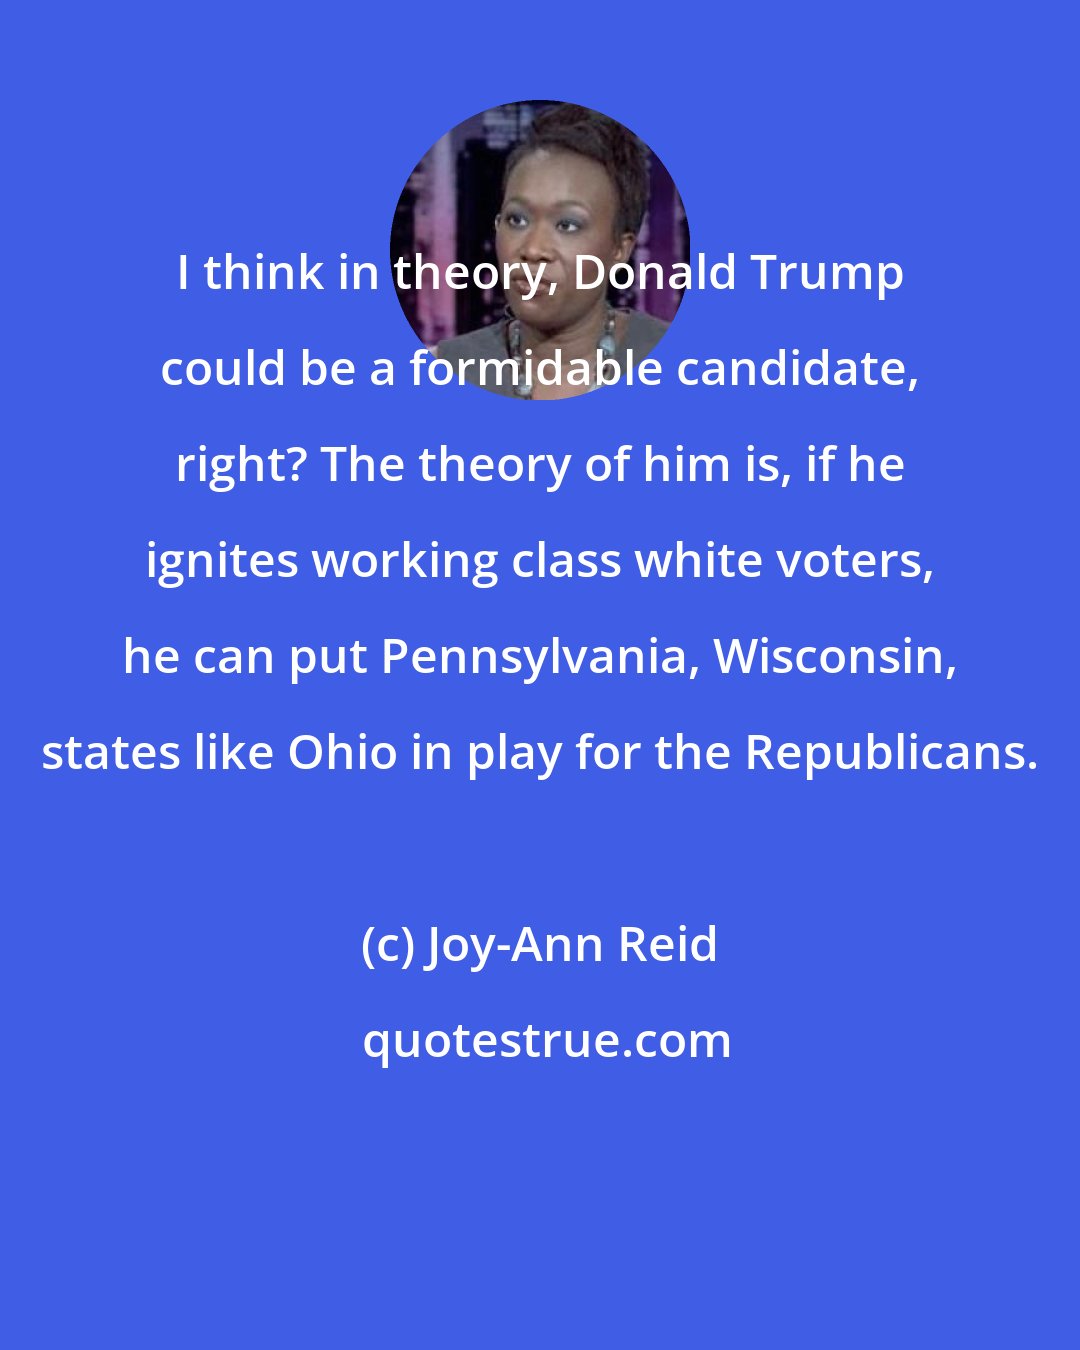 Joy-Ann Reid: I think in theory, Donald Trump could be a formidable candidate, right? The theory of him is, if he ignites working class white voters, he can put Pennsylvania, Wisconsin, states like Ohio in play for the Republicans.